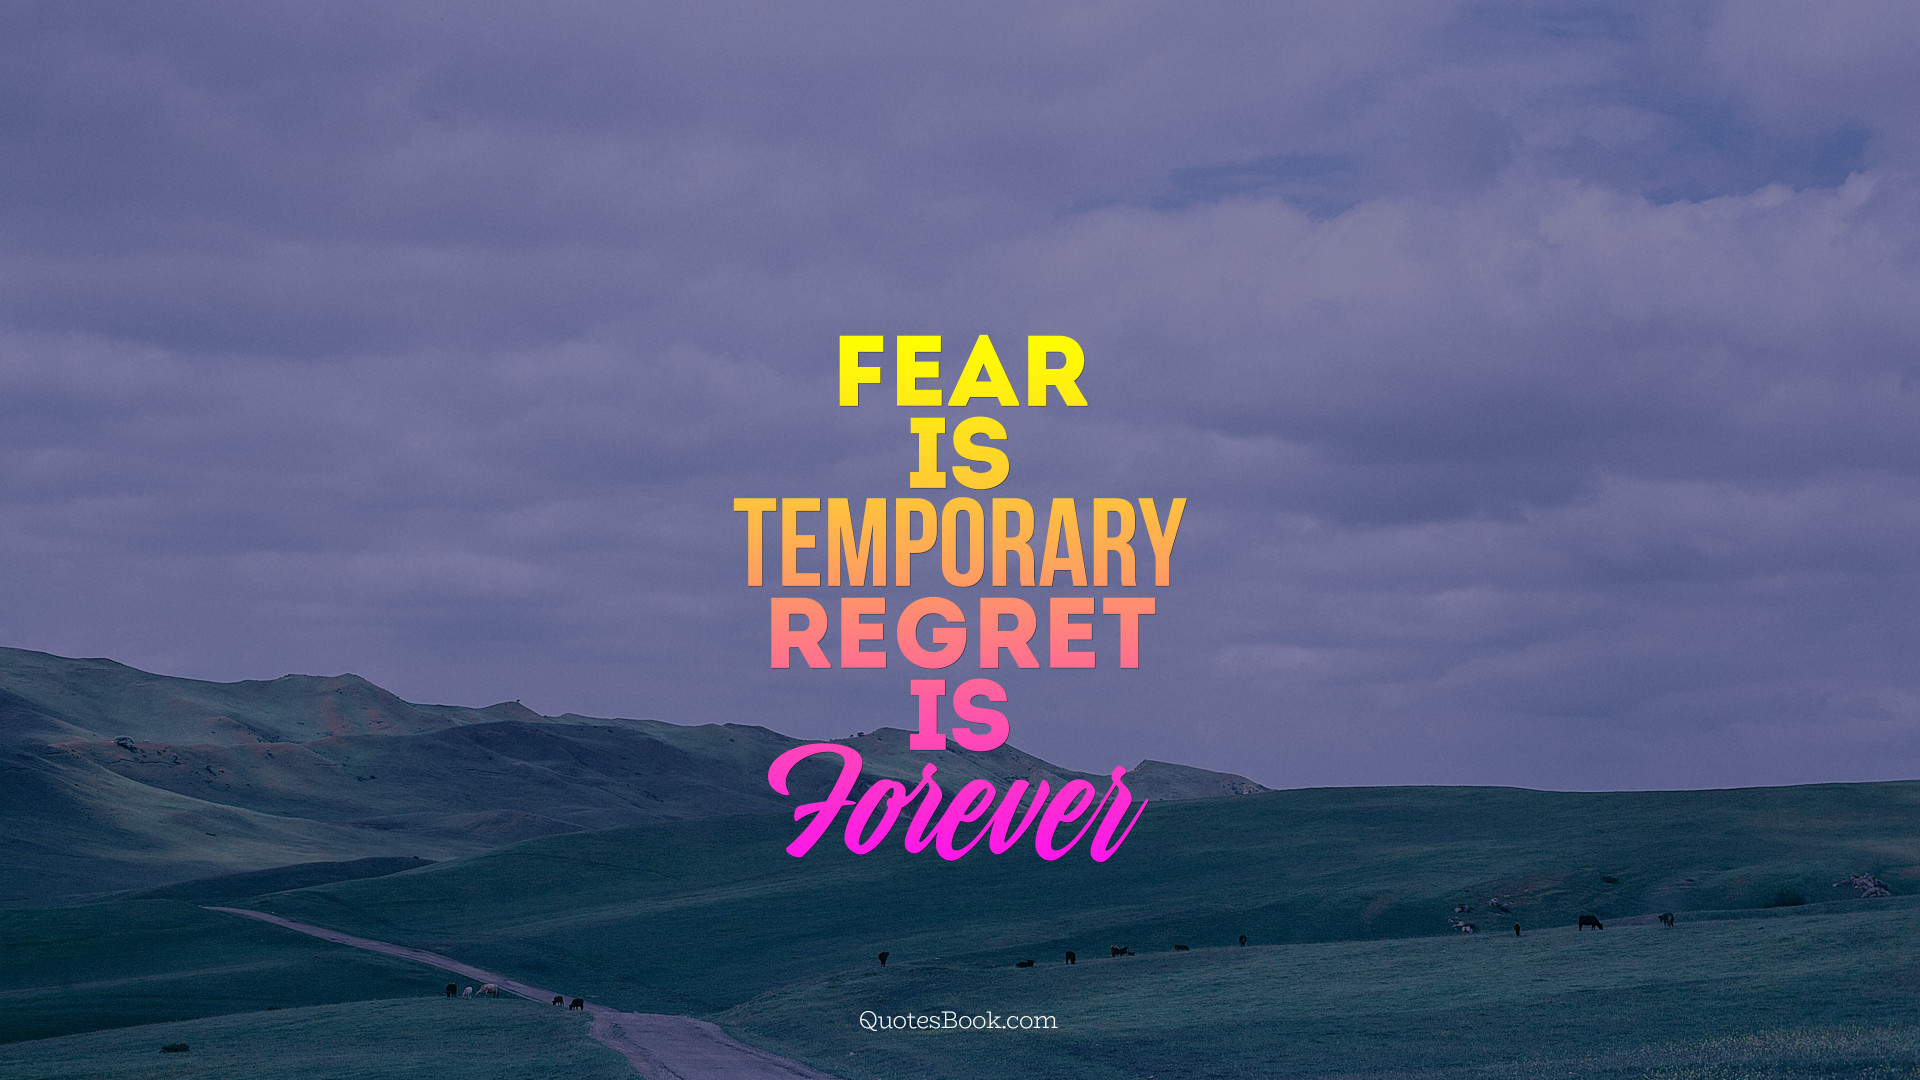 Fear is temporary Regret is Forever - QuotesBook